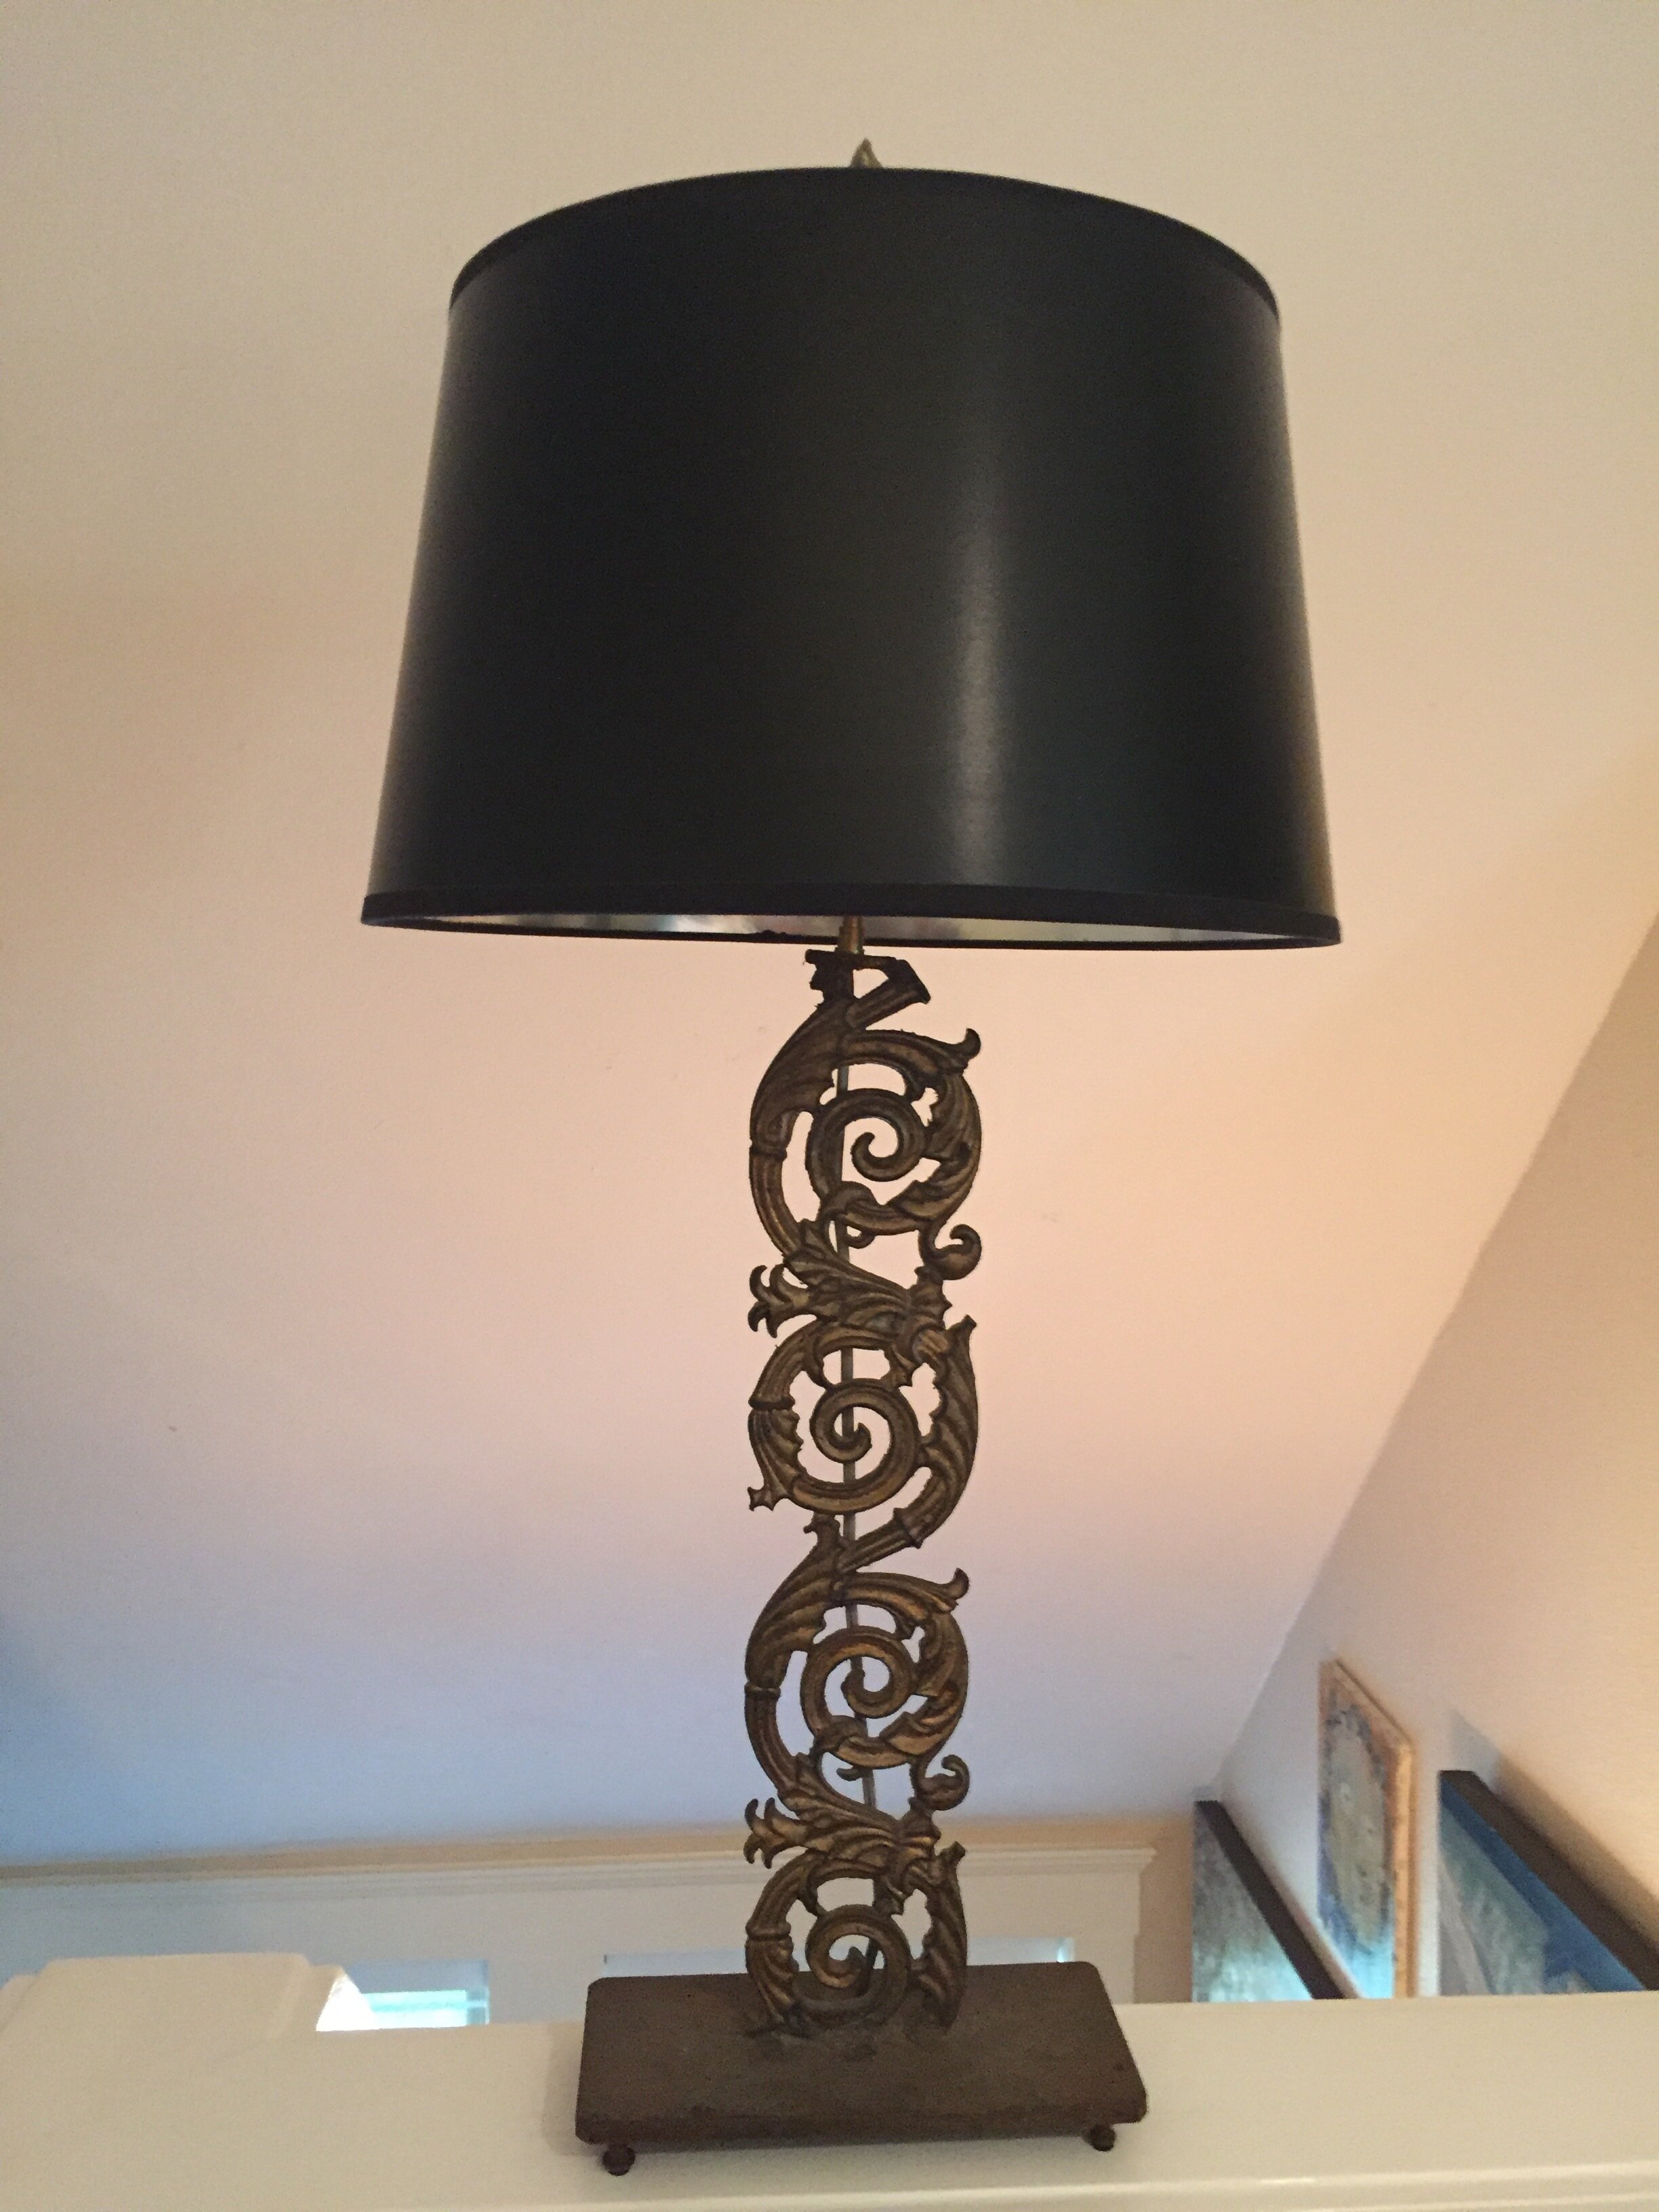 French Gilded Cast Iron Lamp - $250